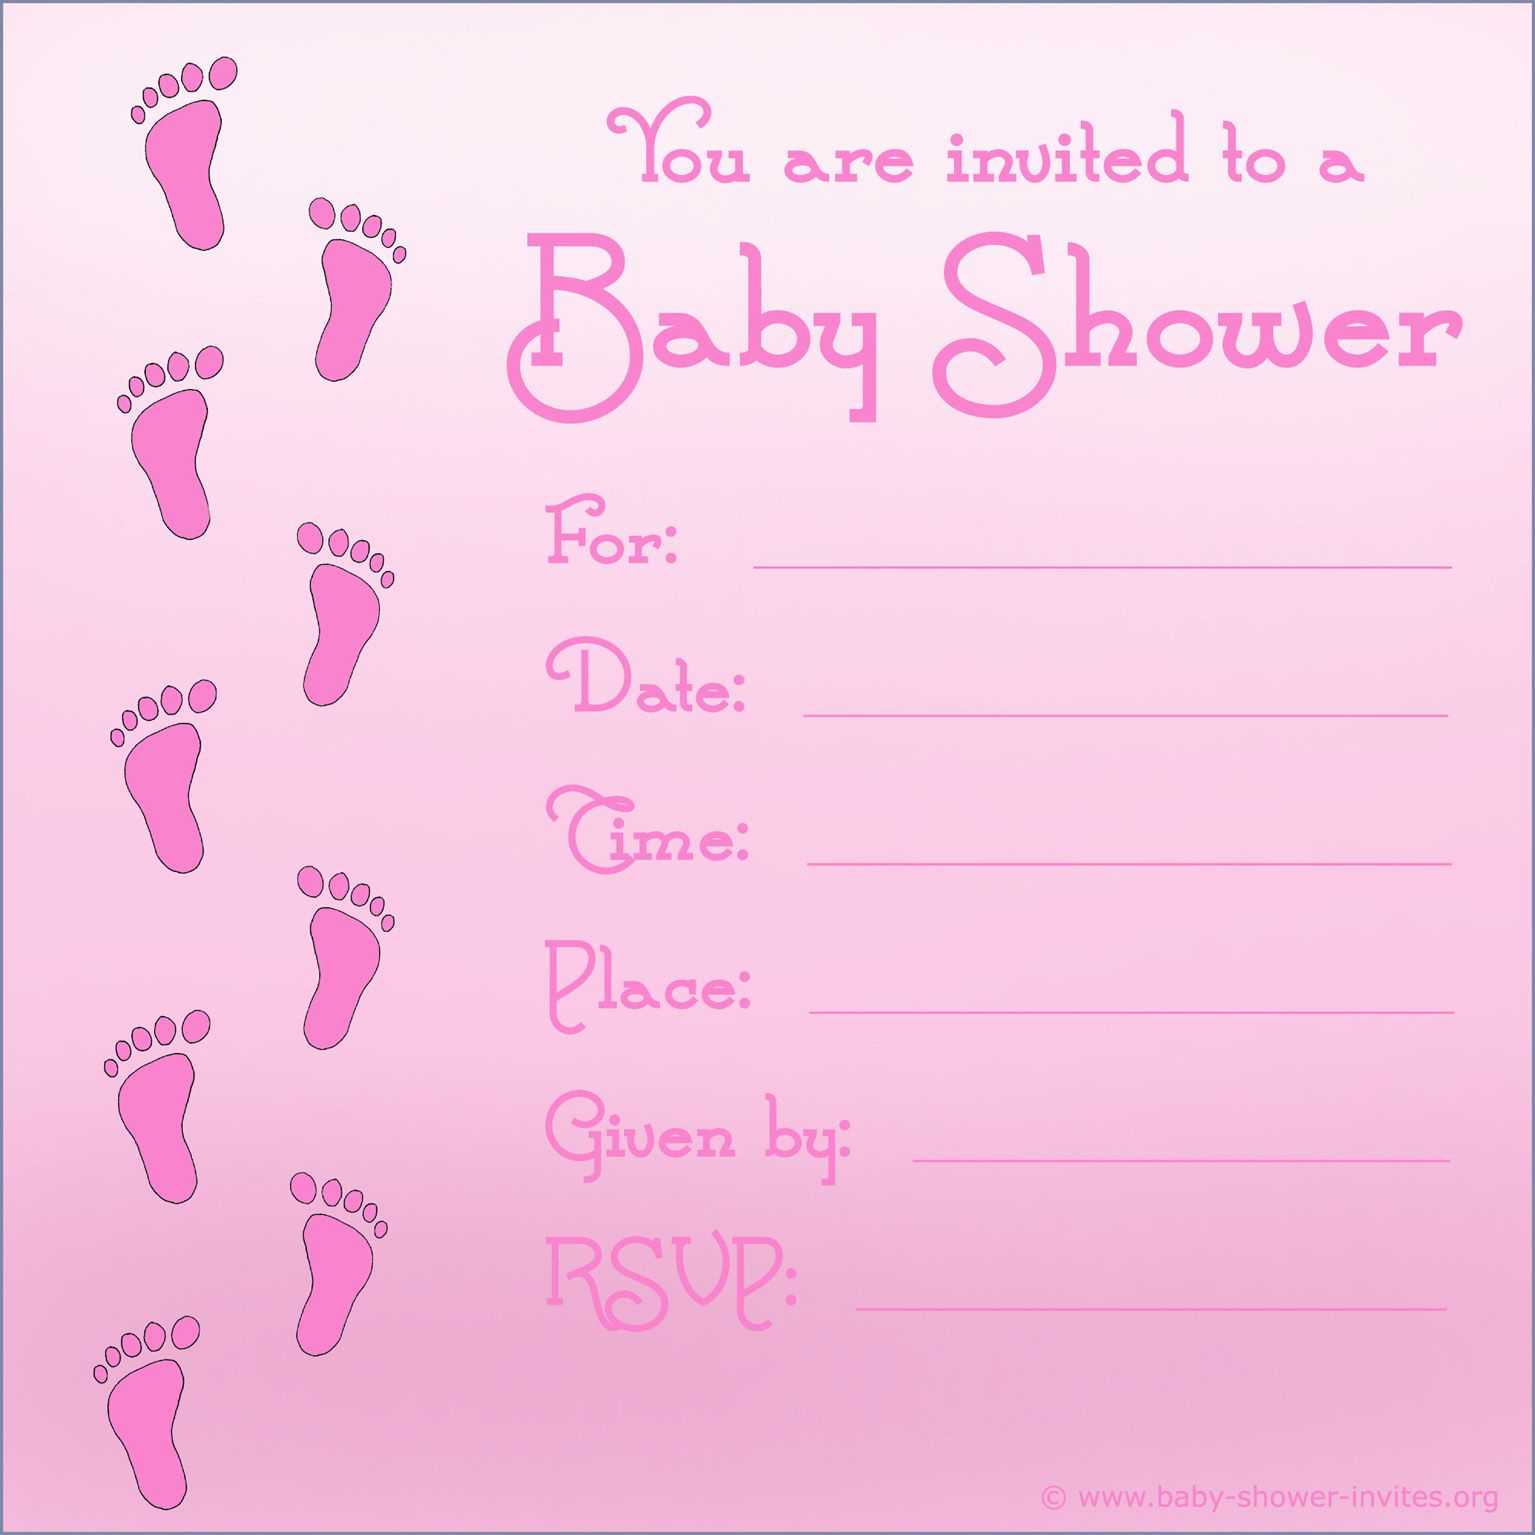 Baby Shower Invitations Cards Designs : Baby Shower Within Free Baby Shower Invitation Templates For Word